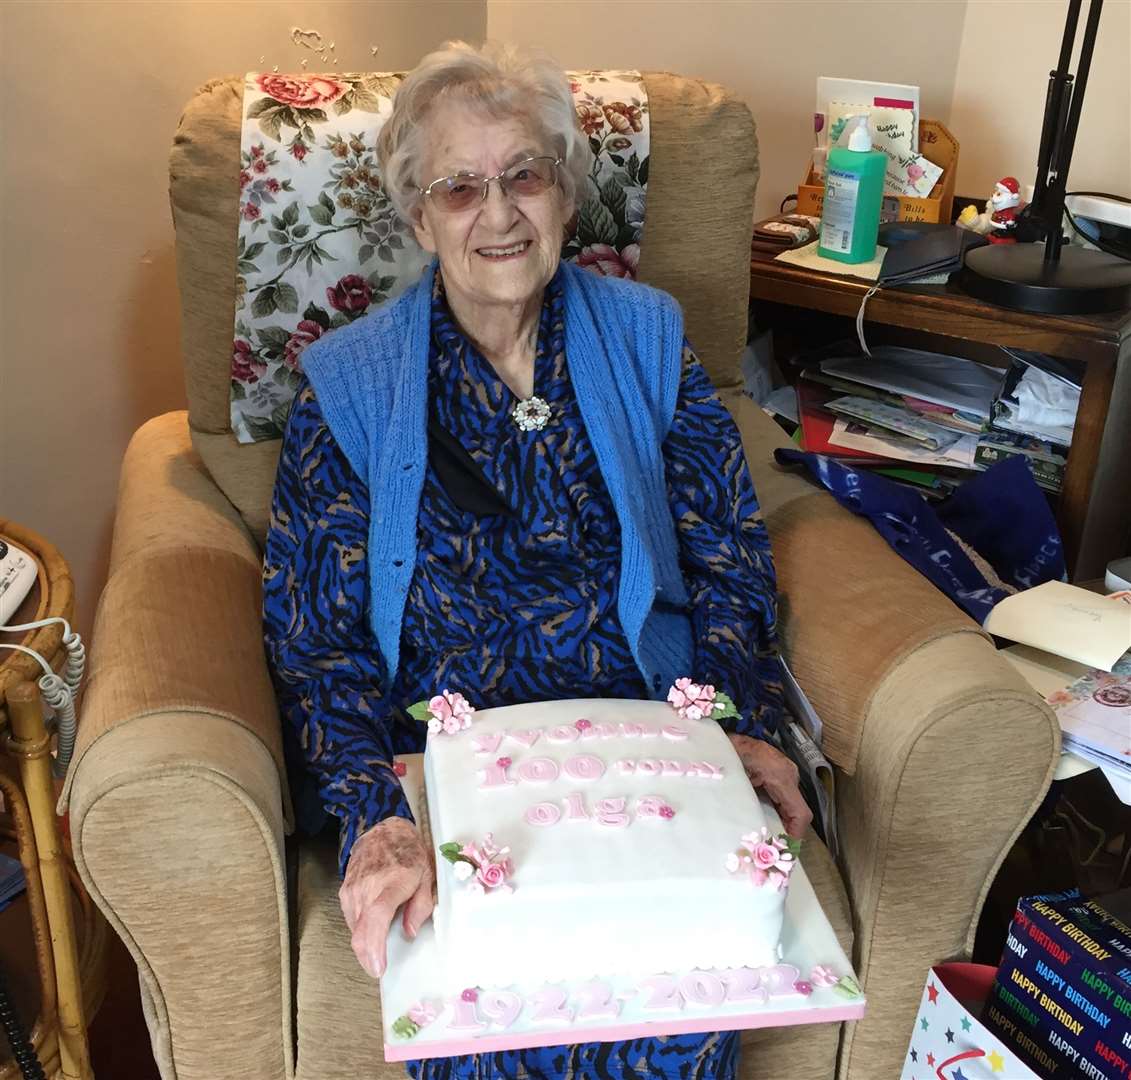 Yvonne Burgess from Swalecliffe with her birthday cake